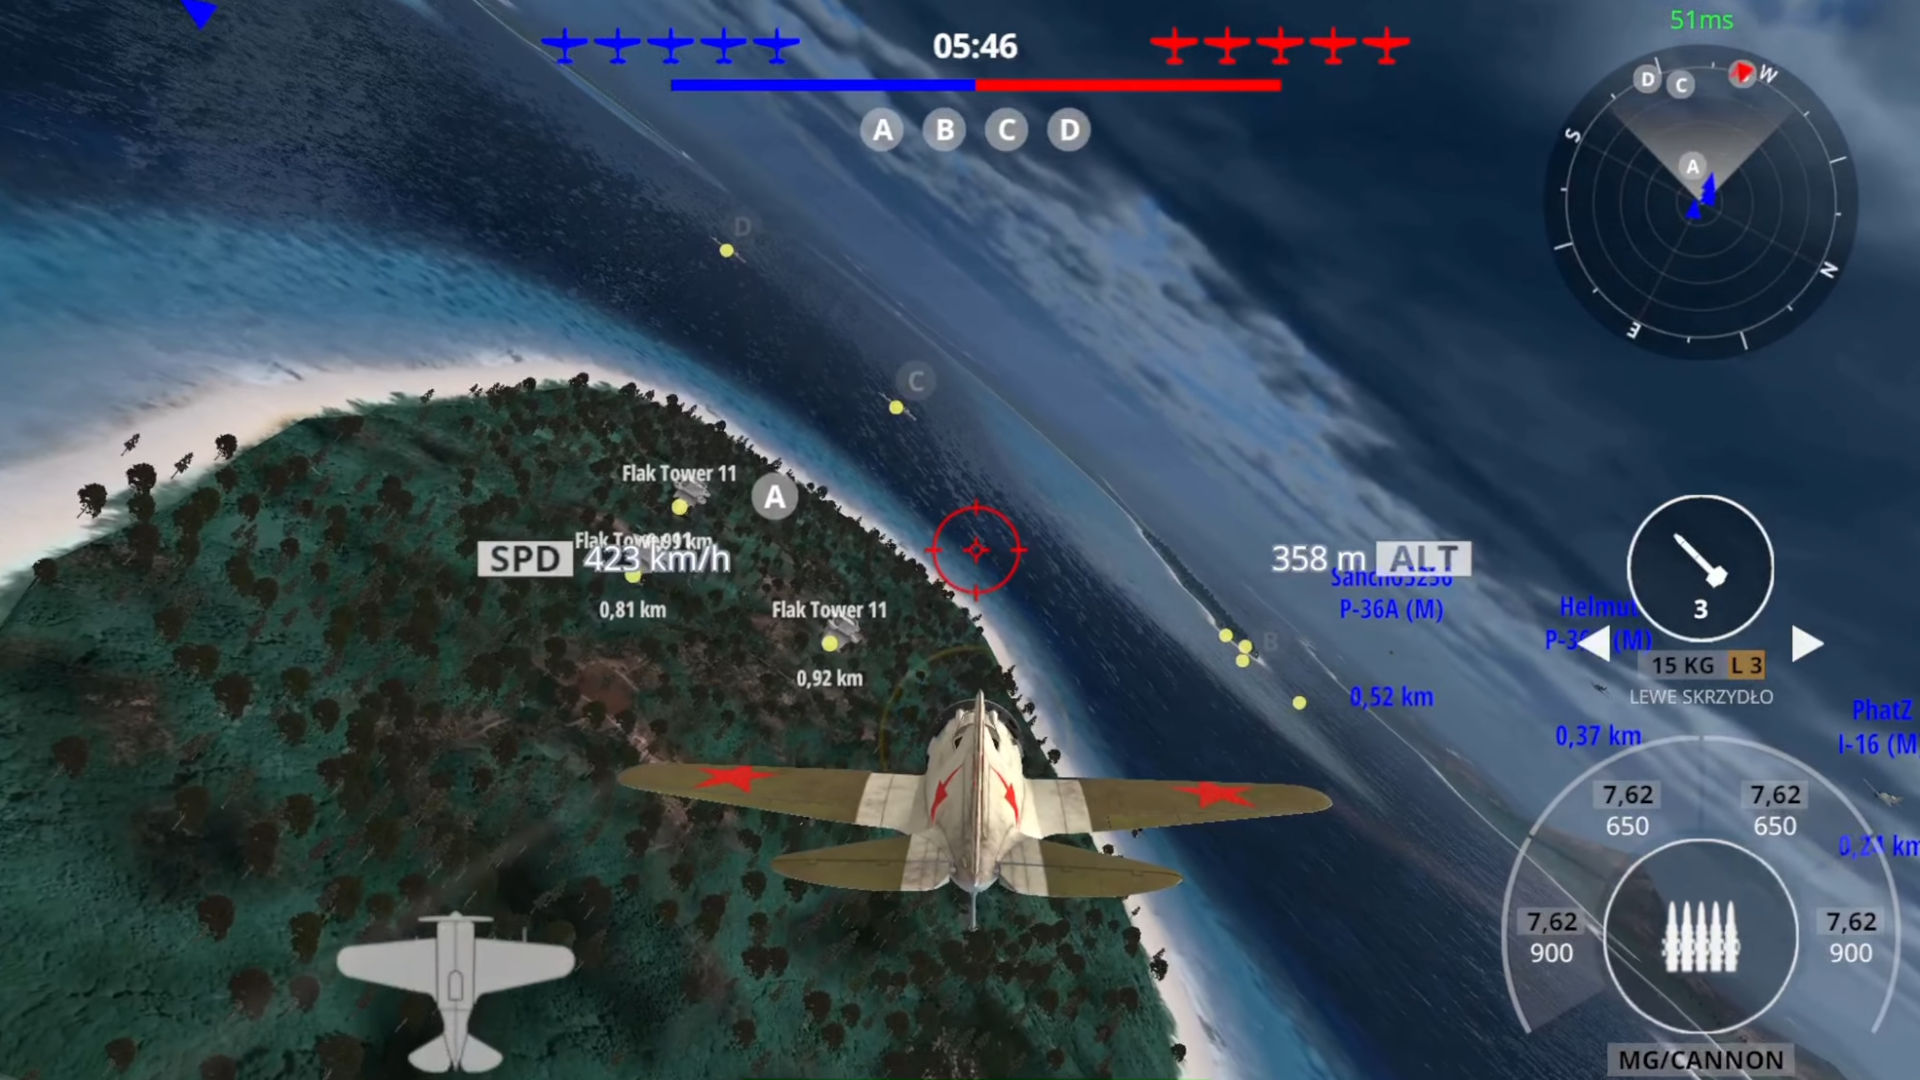 airplane fighter games